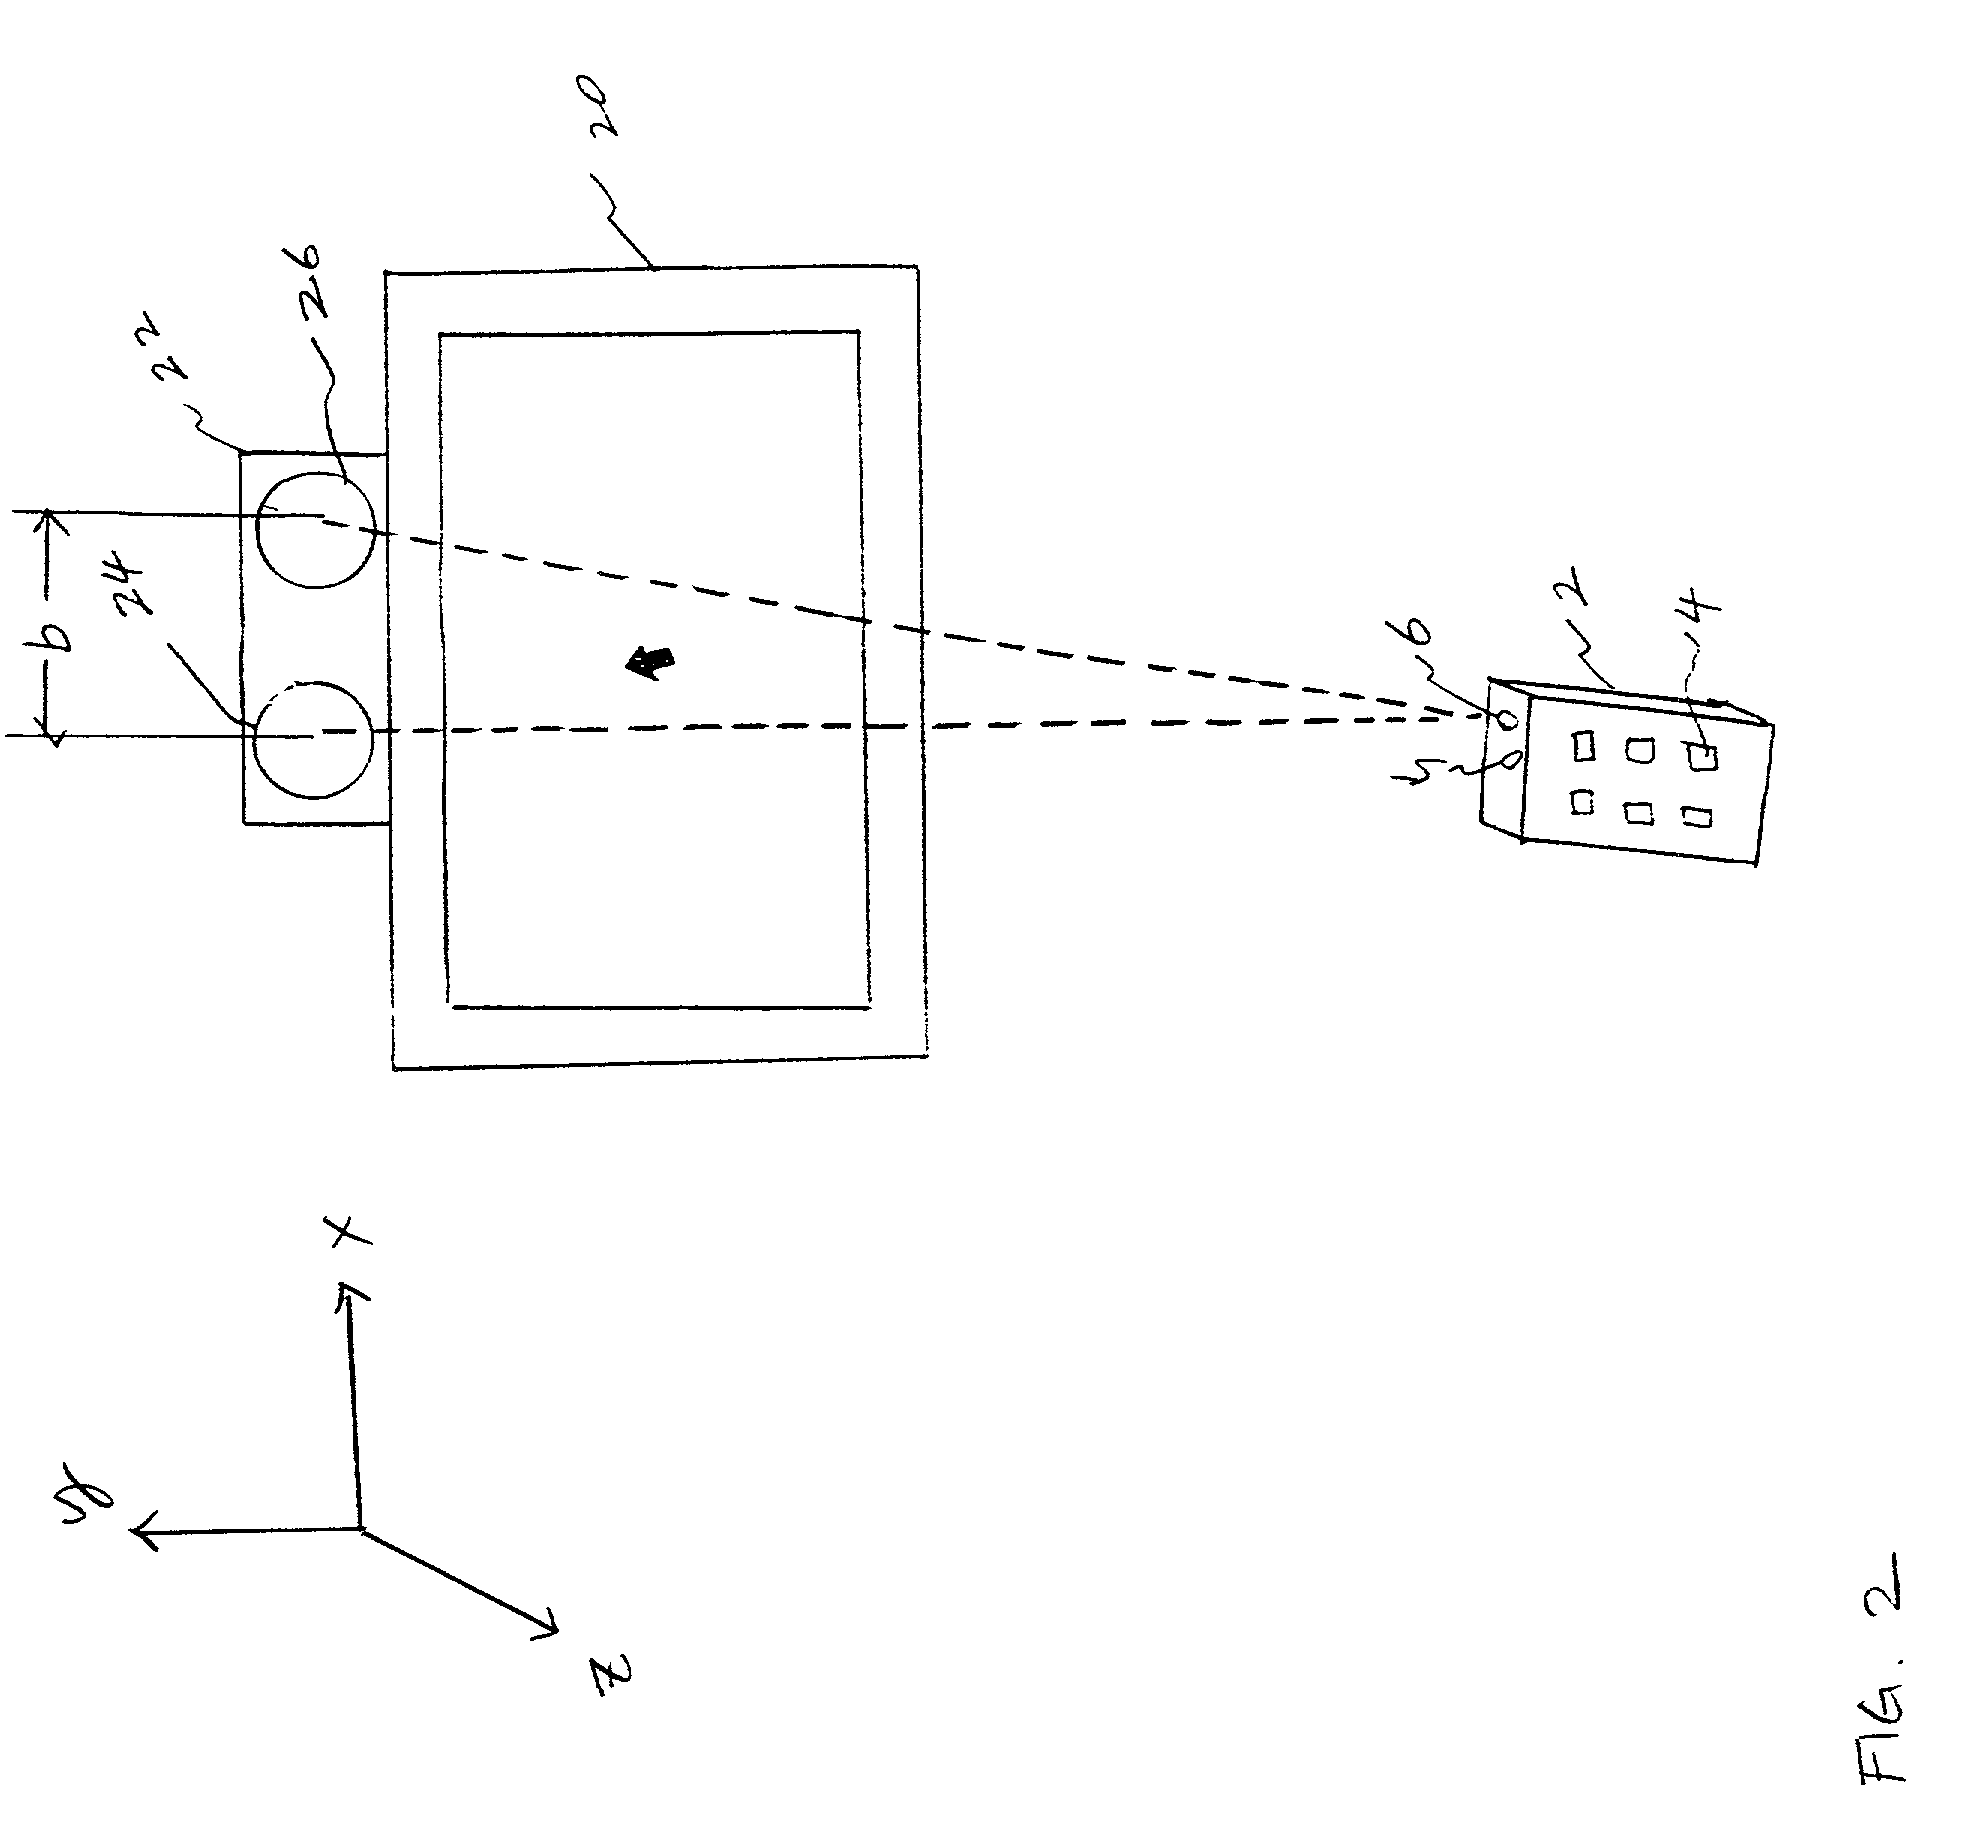 Remote control system and method for a television receiver